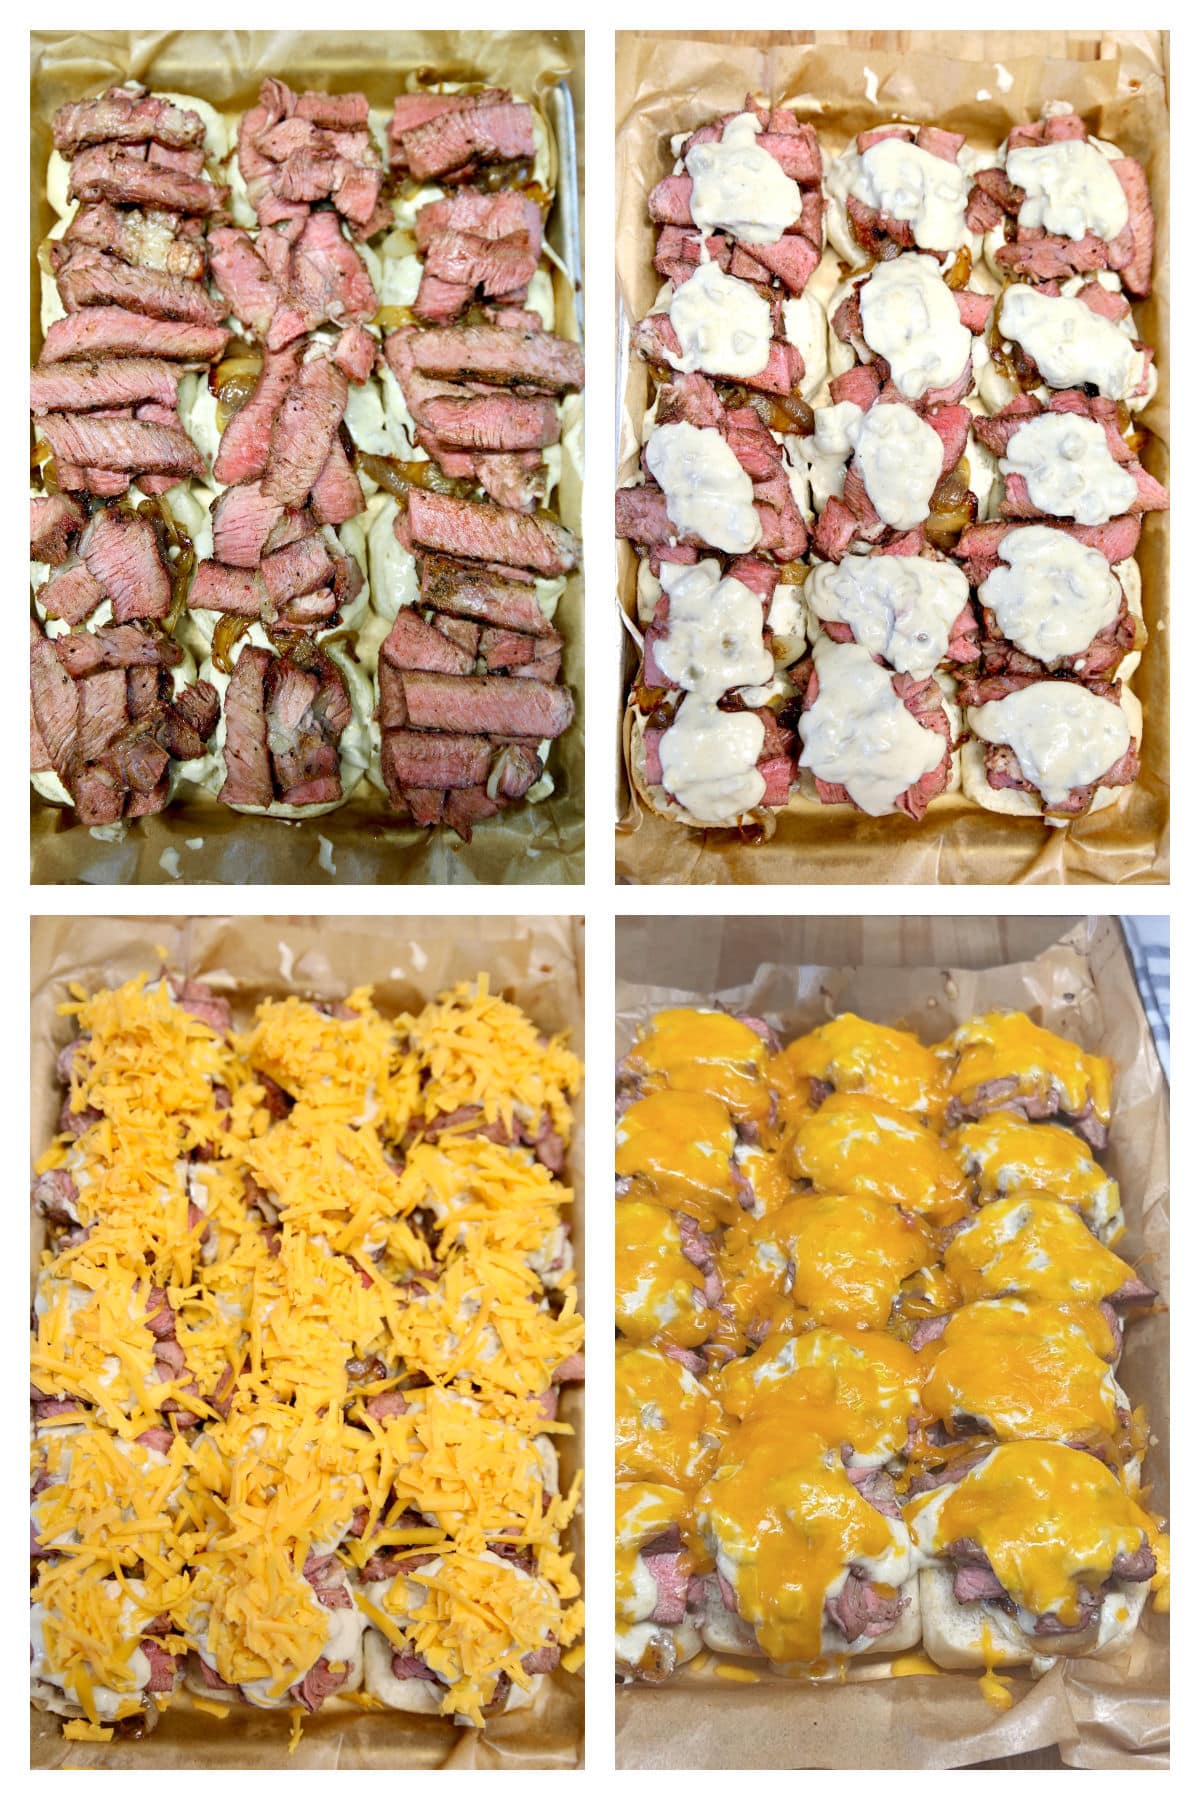 Collage making steak sliders with green chile sauce and cheddar cheese.